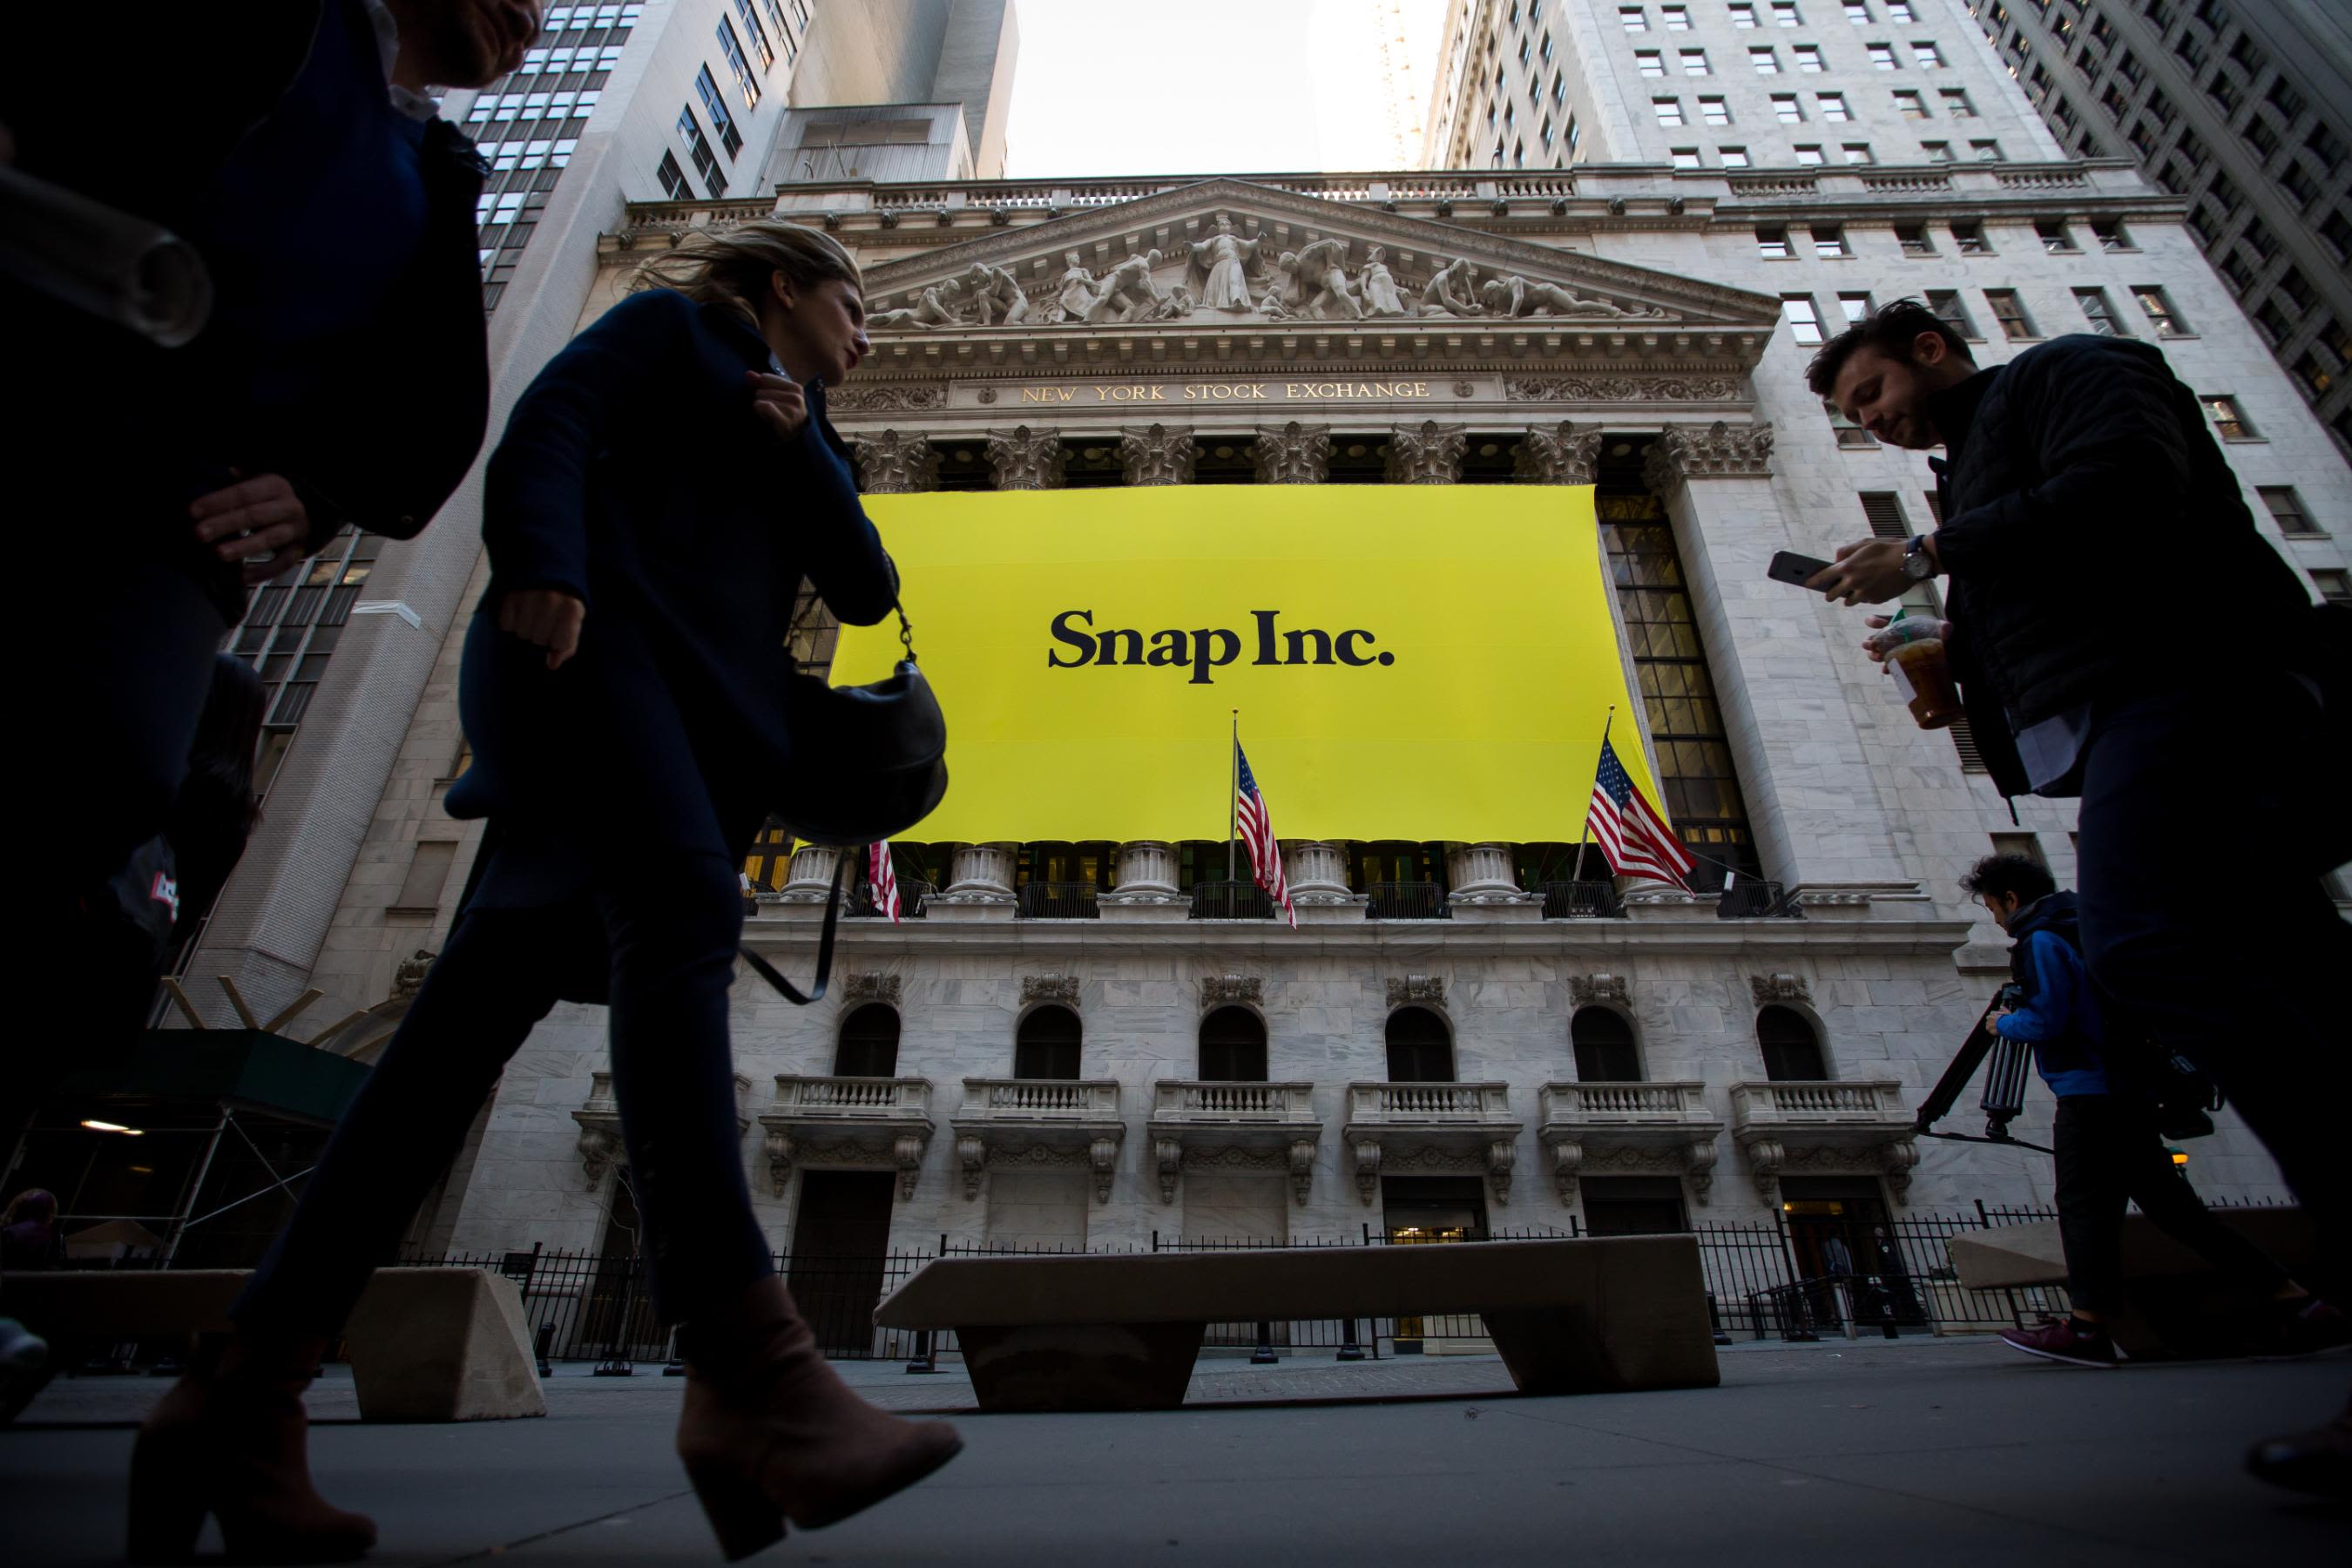 Snapchat always proved critics wrong. Then Evan Spiegel pushed for